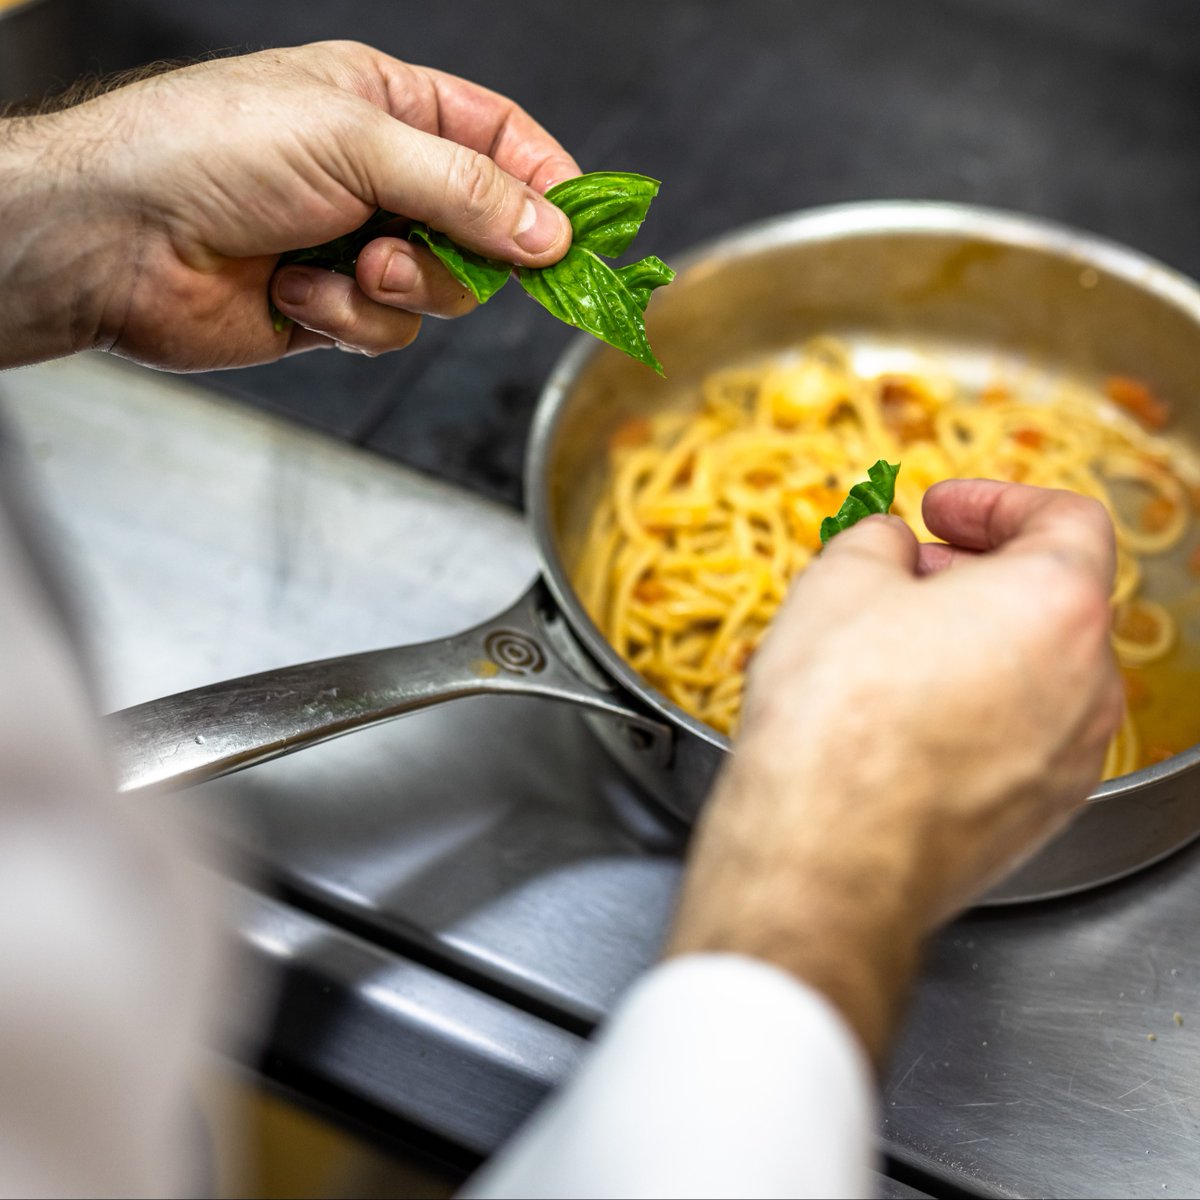 Handcrafted with care, enjoyed with every bite. ​ #FSSurfside #LidoRestaurant #pasta